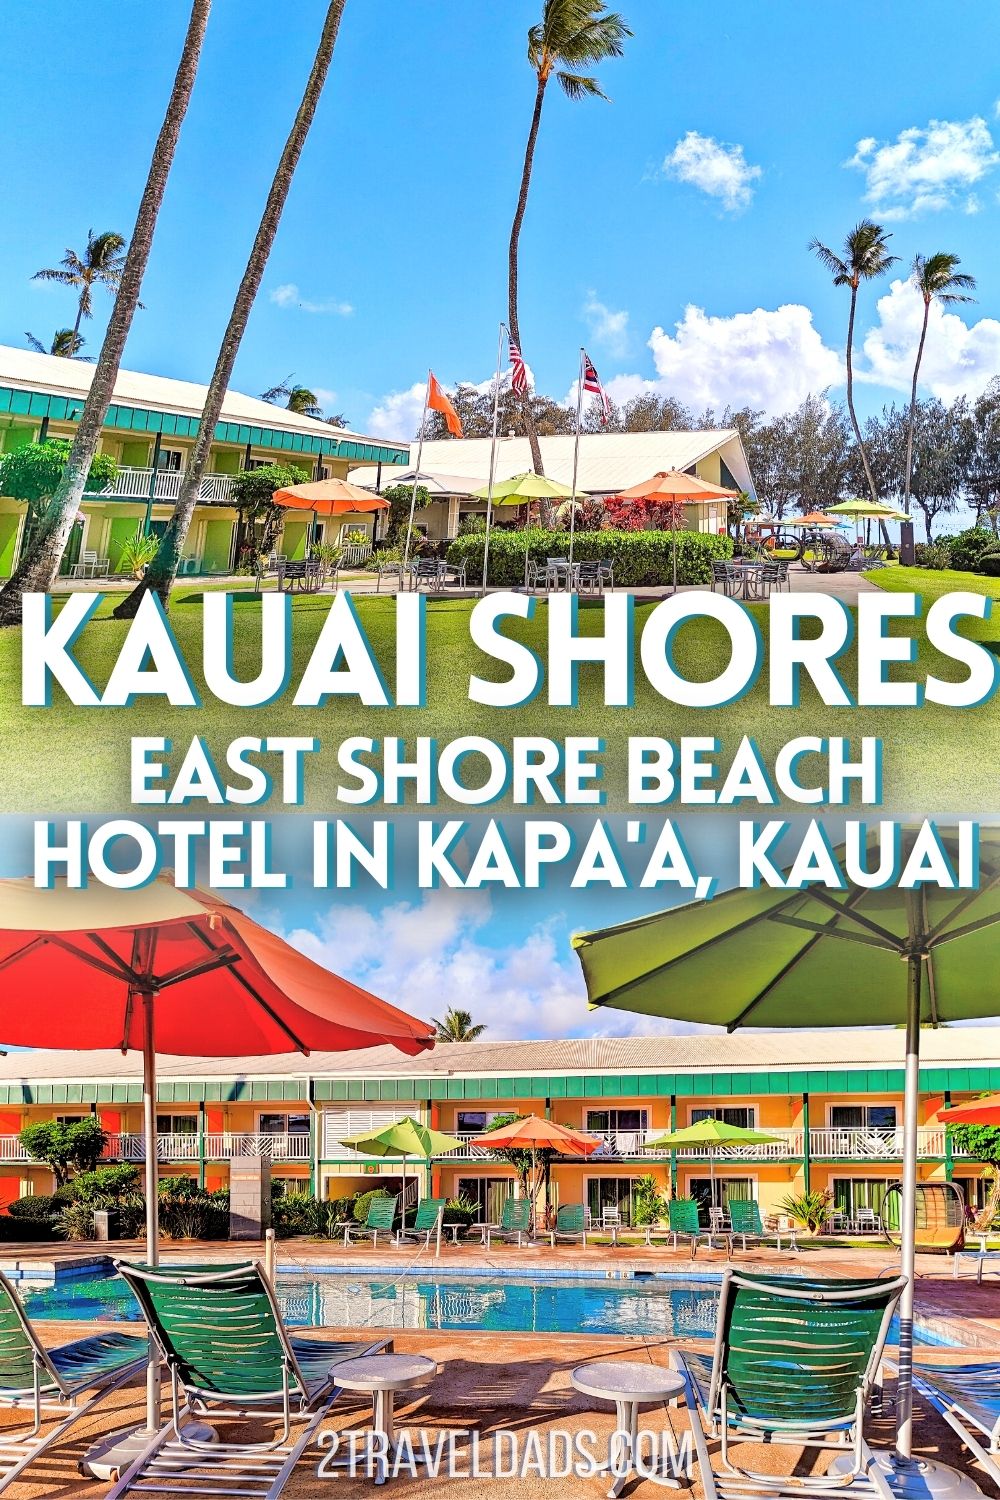 Review of the Kauai Shores Hotel in Kapa'a on the East Shore of Kauai. See what we loved about staying here and what we wish was different. Plus, ideas for things to do on a trip to Kauai.